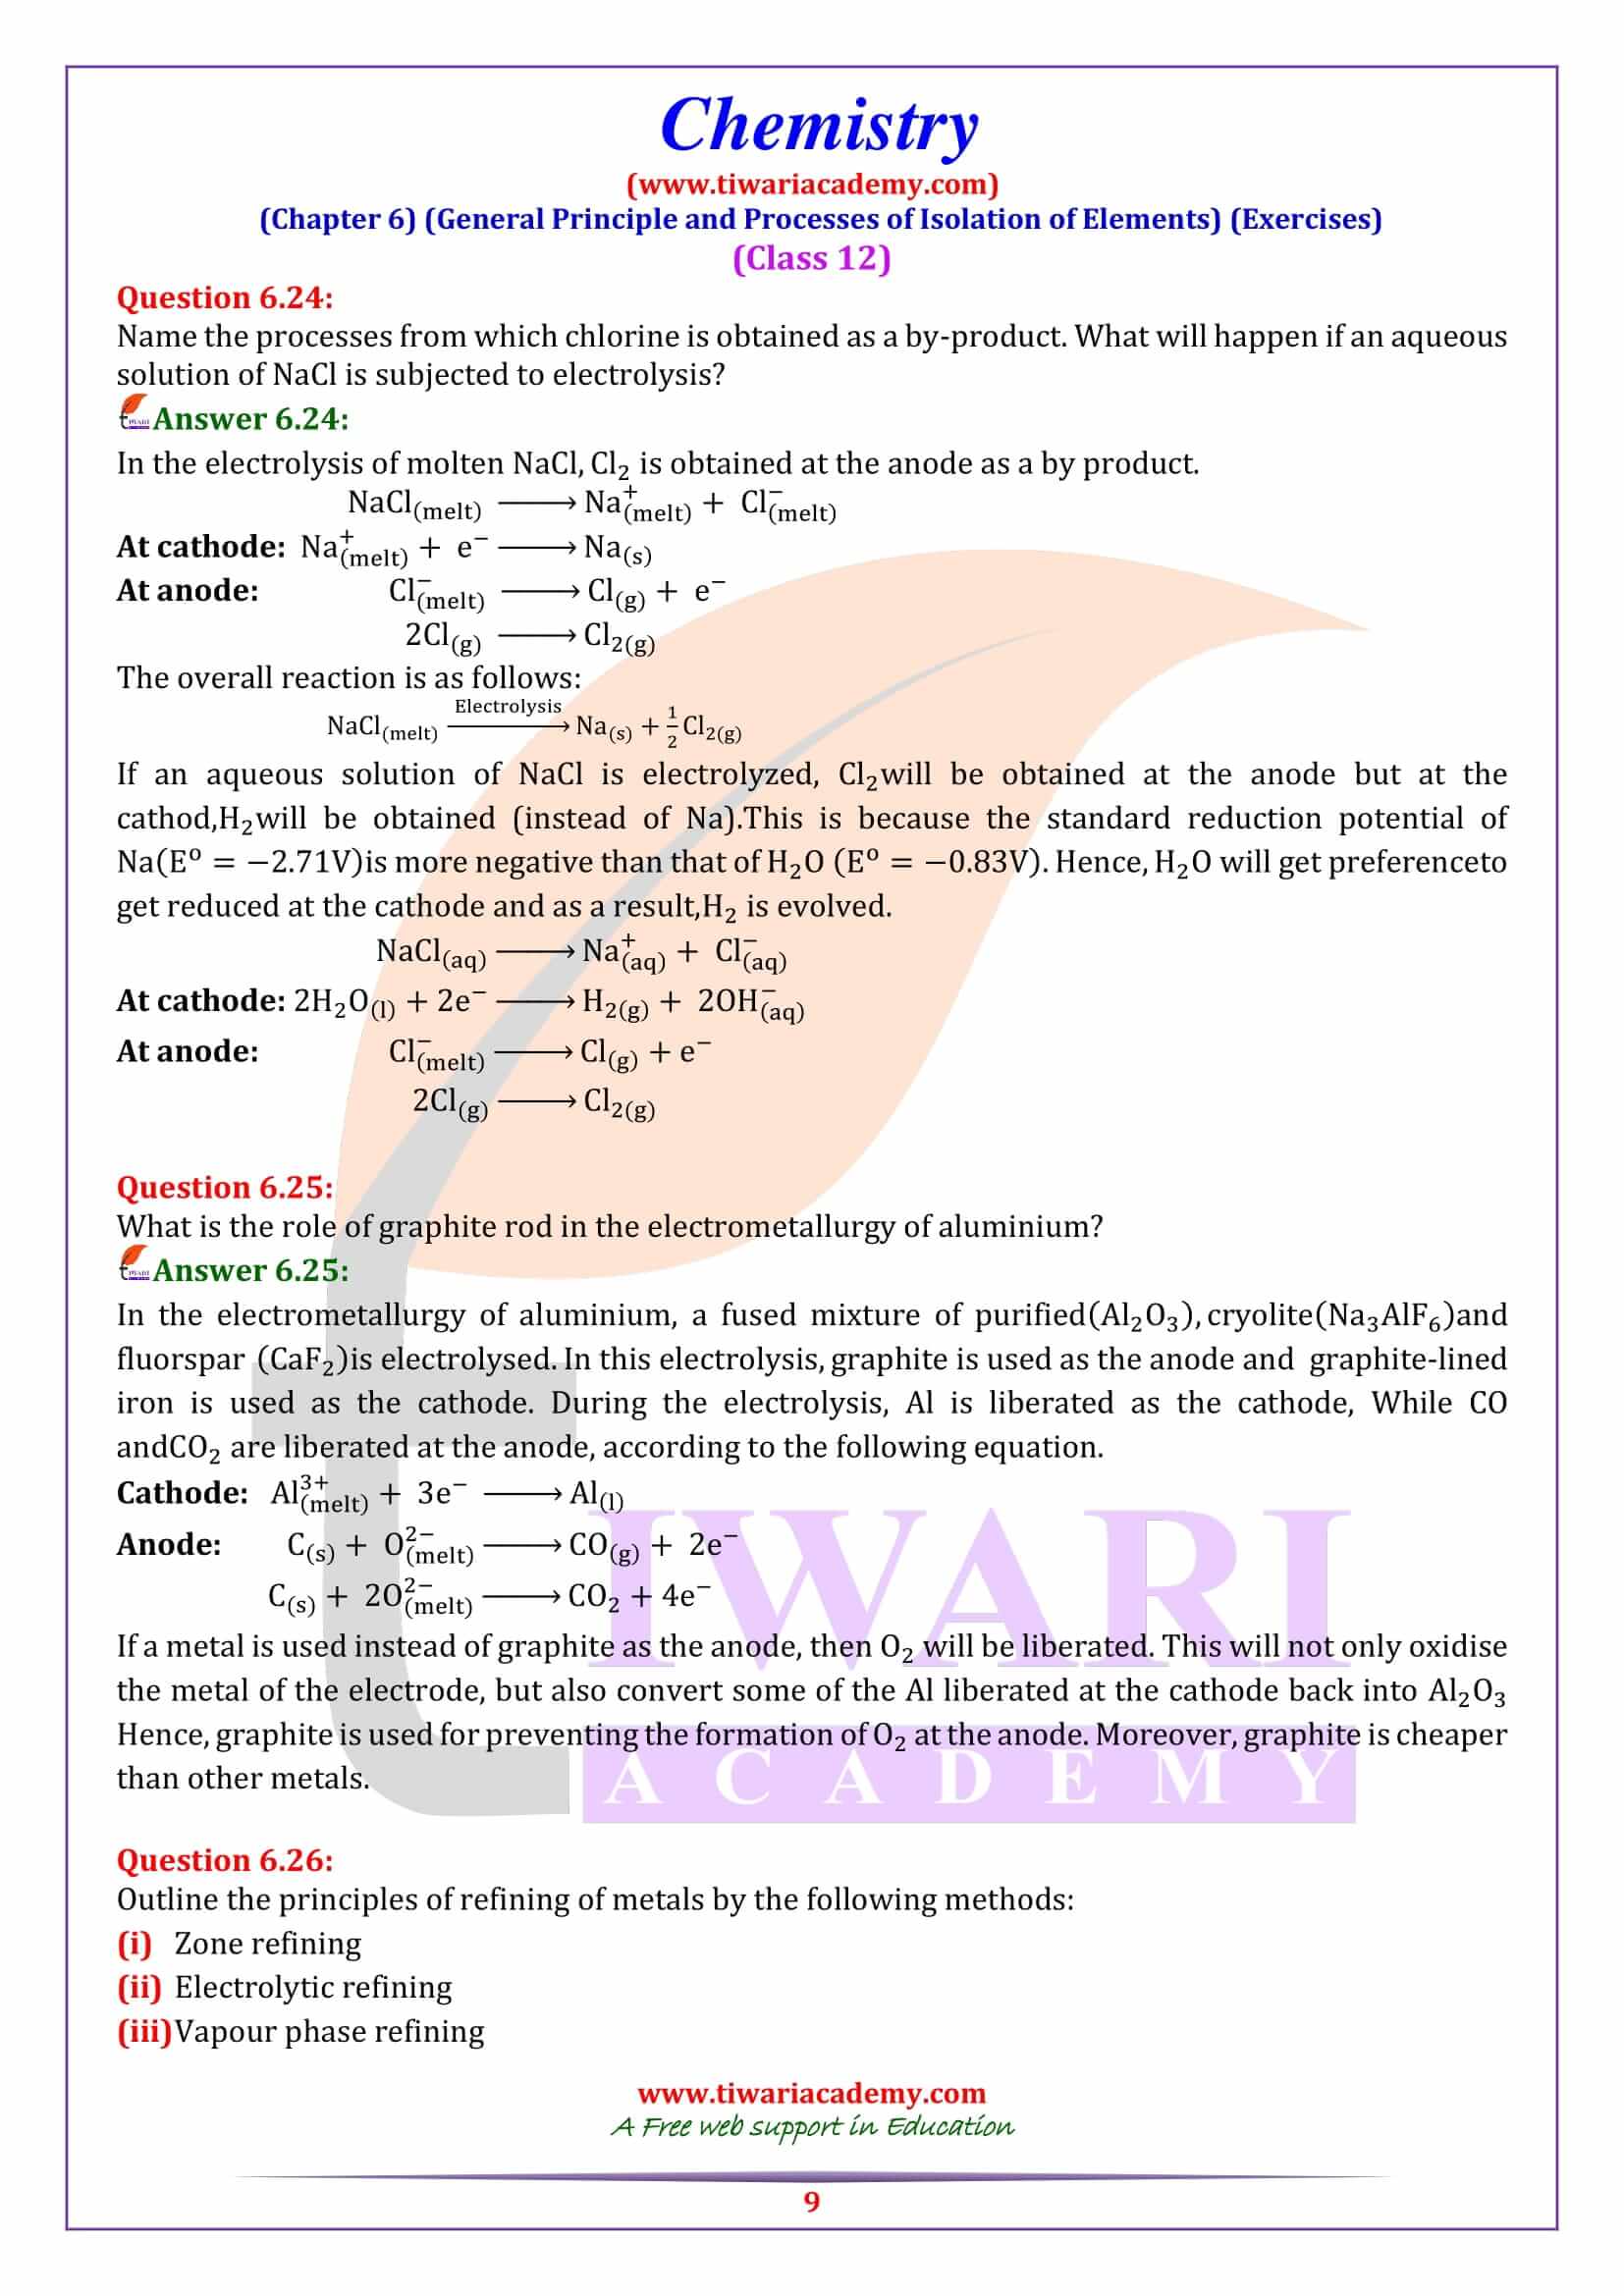 NCERT Solutions for Class 12 Chemistry Chapter 6 free